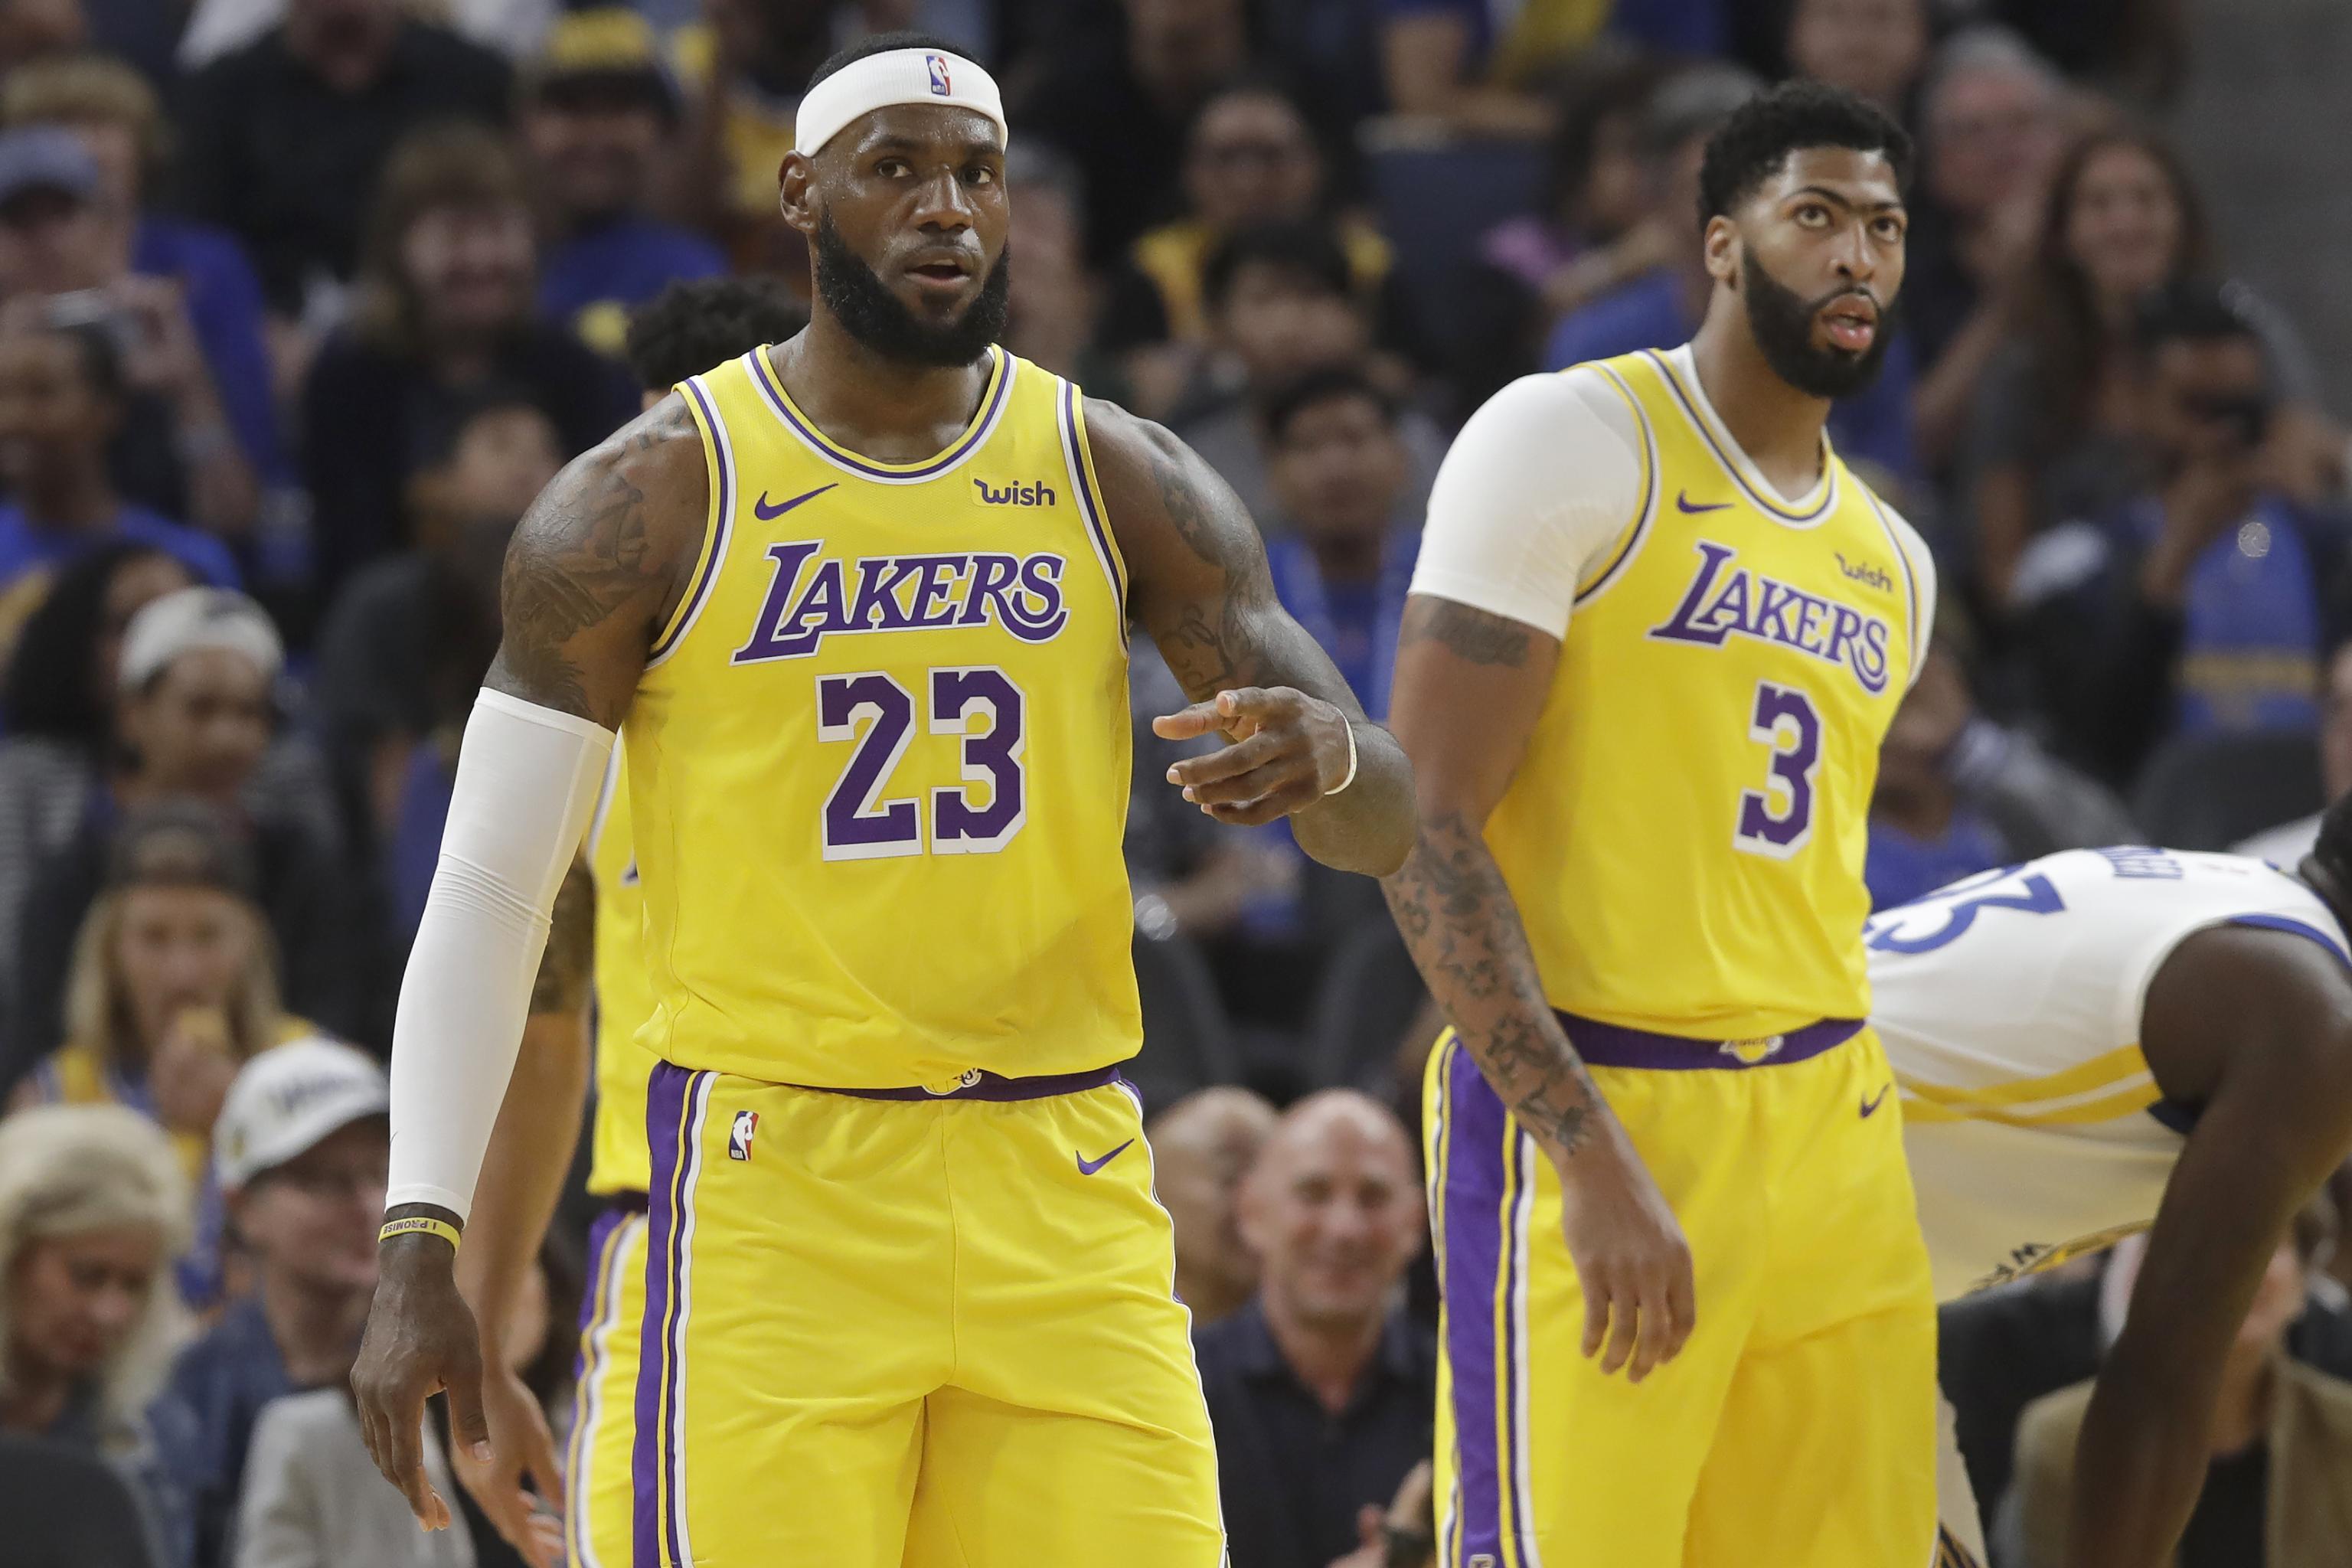 Why did Lakers' LeBron James switch his jersey number from 23 to 6?